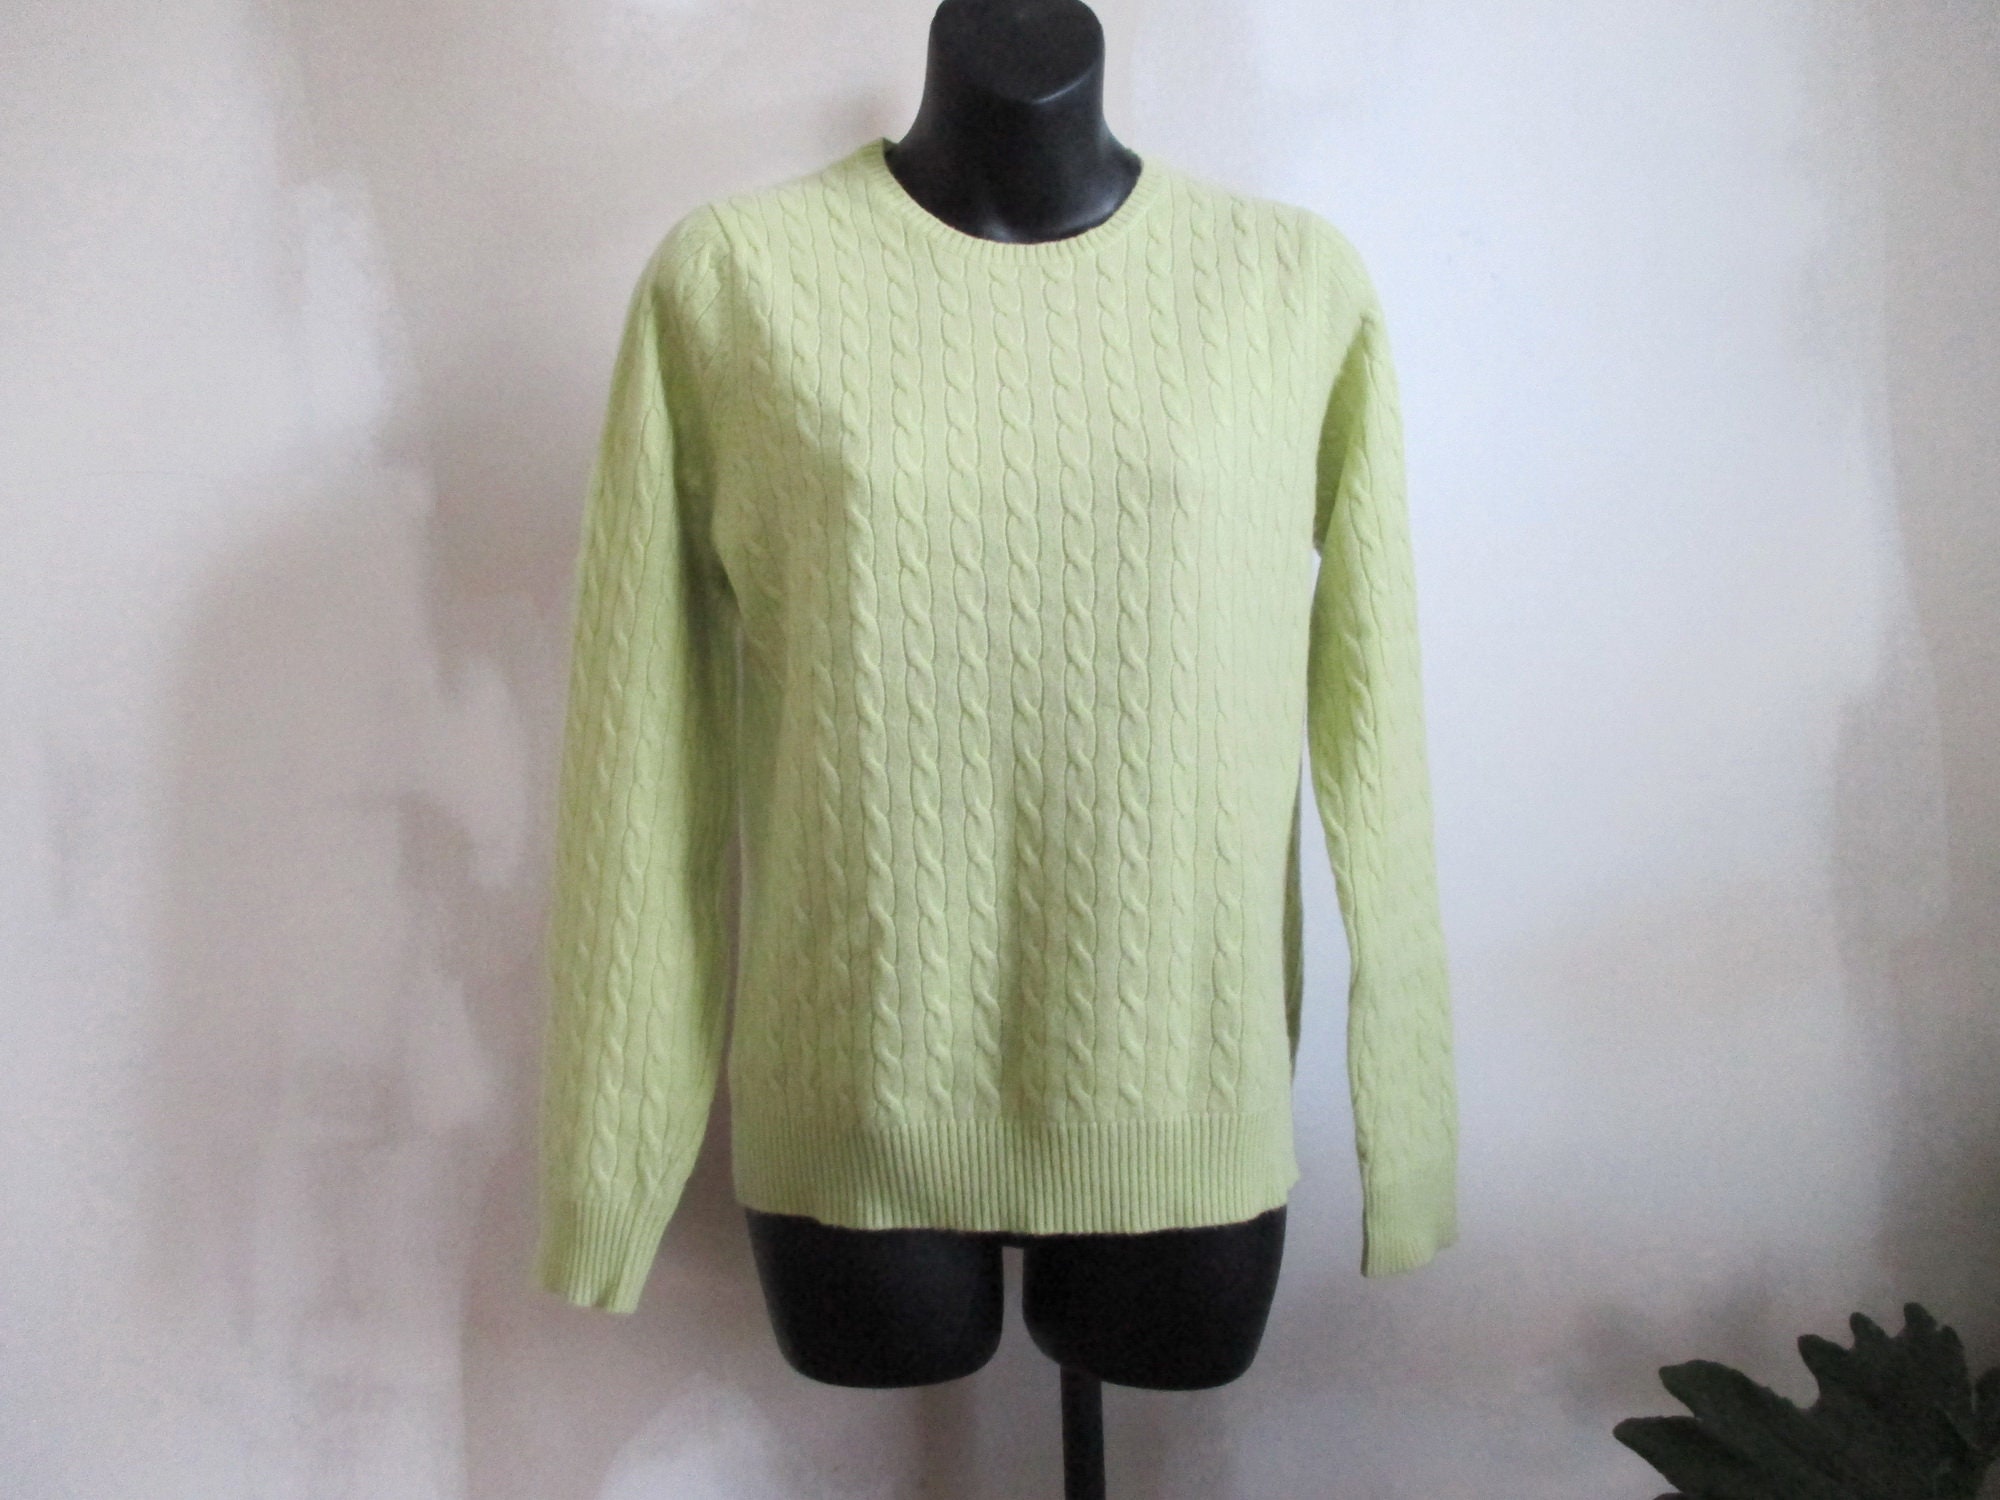 Vintage cashmere sweaters - Etsy